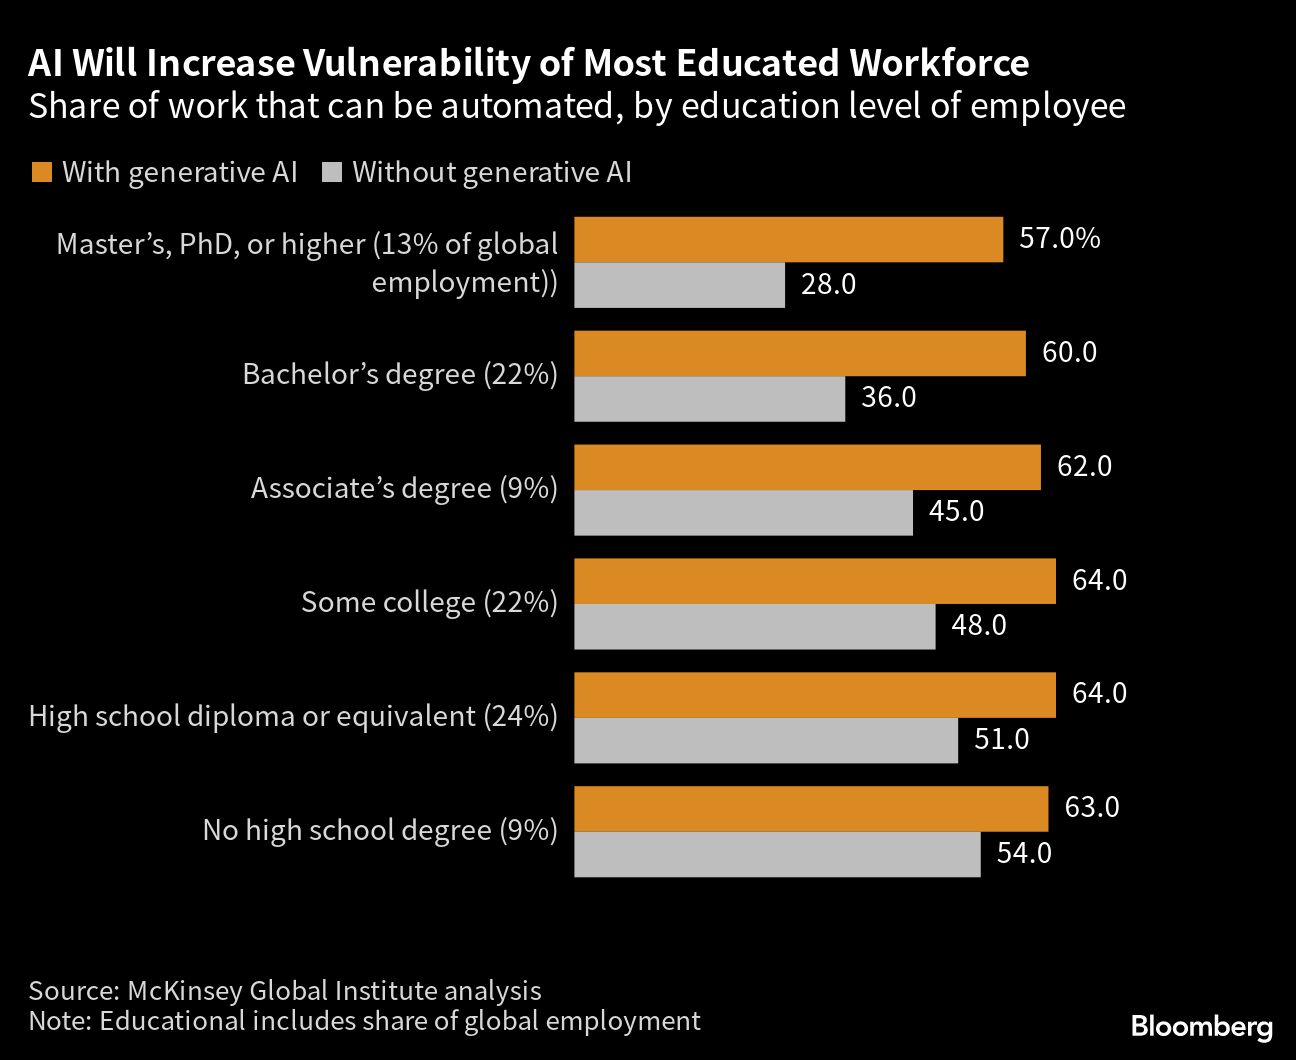 Share of work that can be automated, by education level of employee